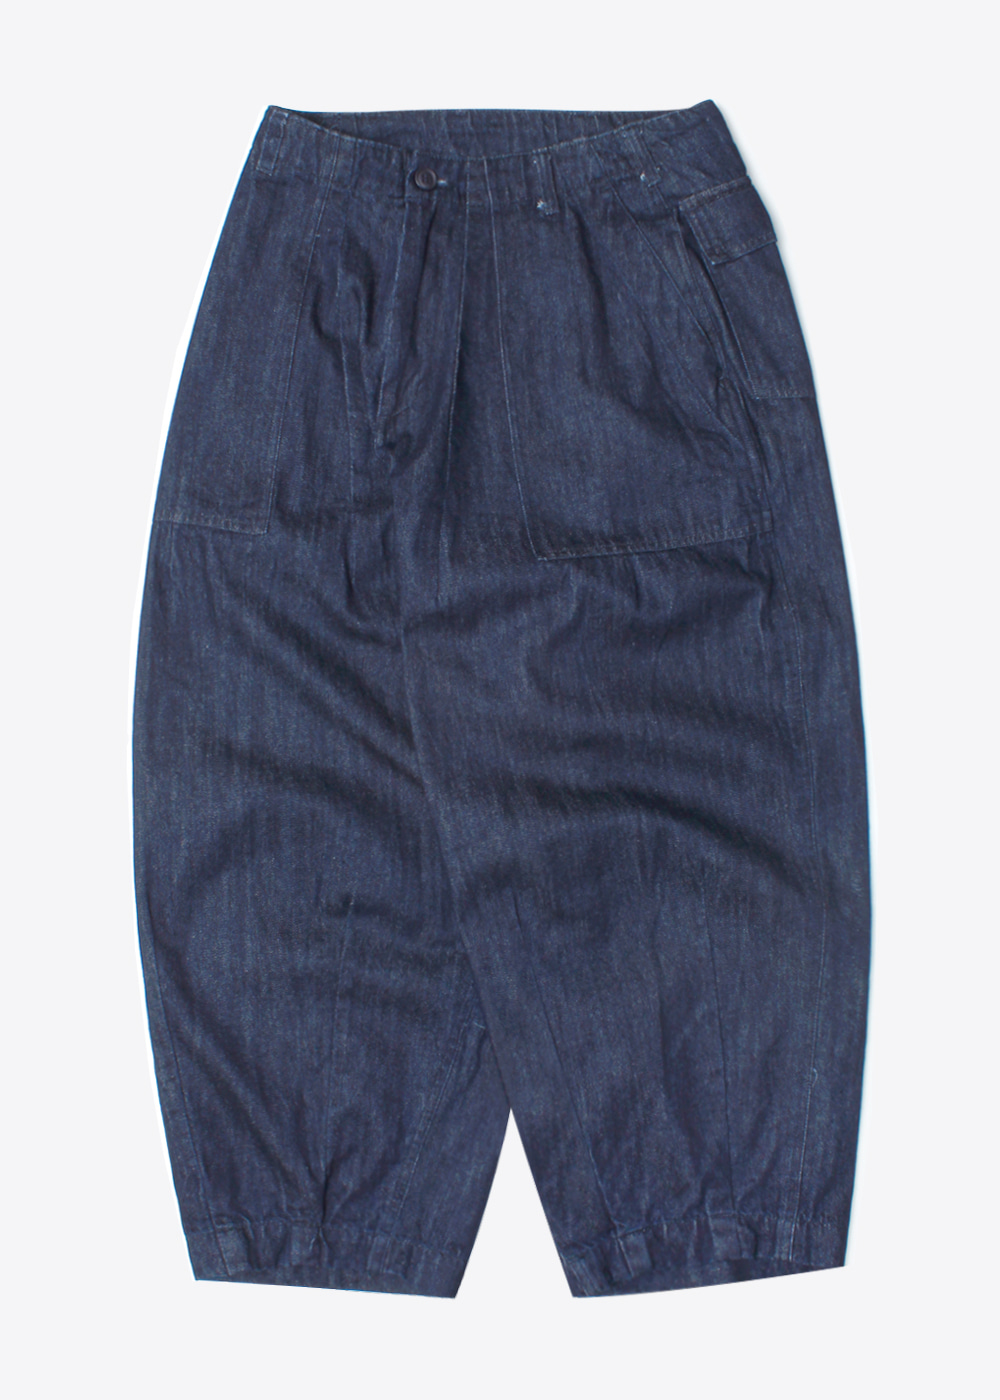 ANOWN’wide fit’hd denim pant